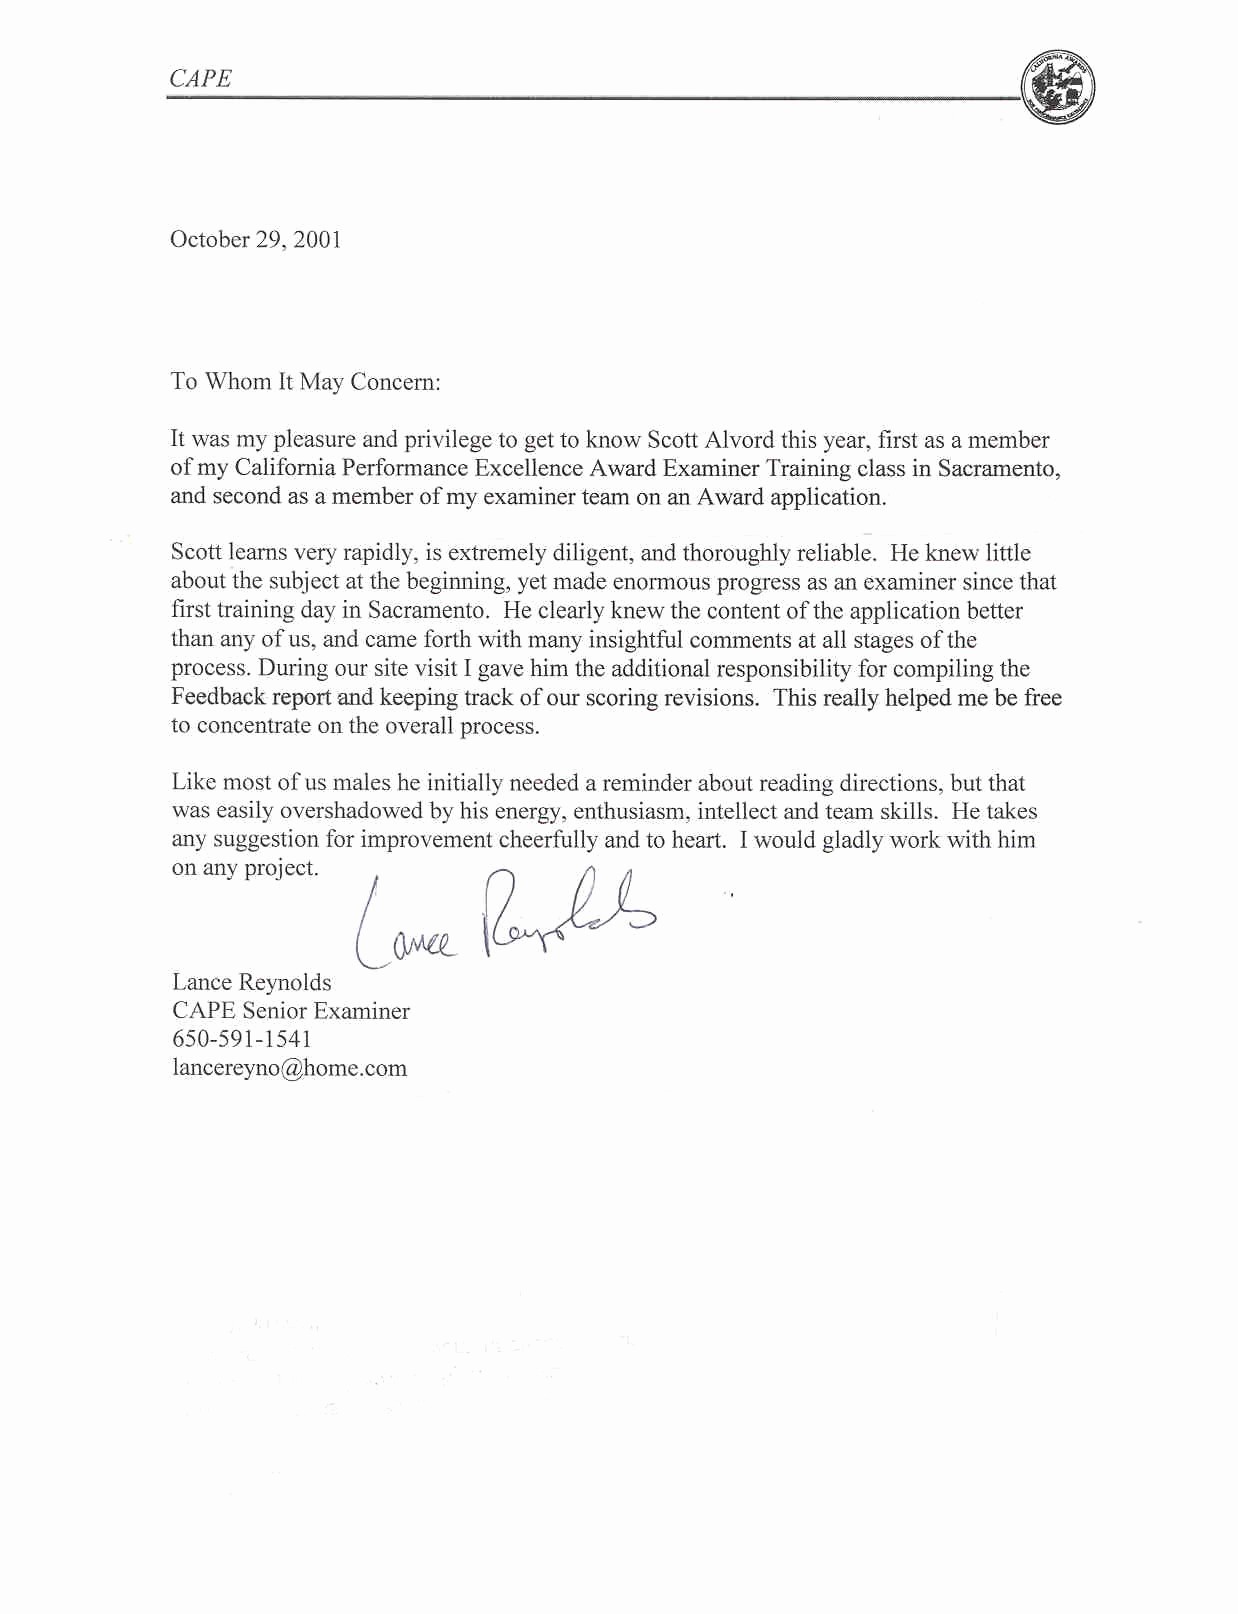 Letter Of Recommendation with Letterhead Fresh Tips for Writing A Letter Of Re Mendation